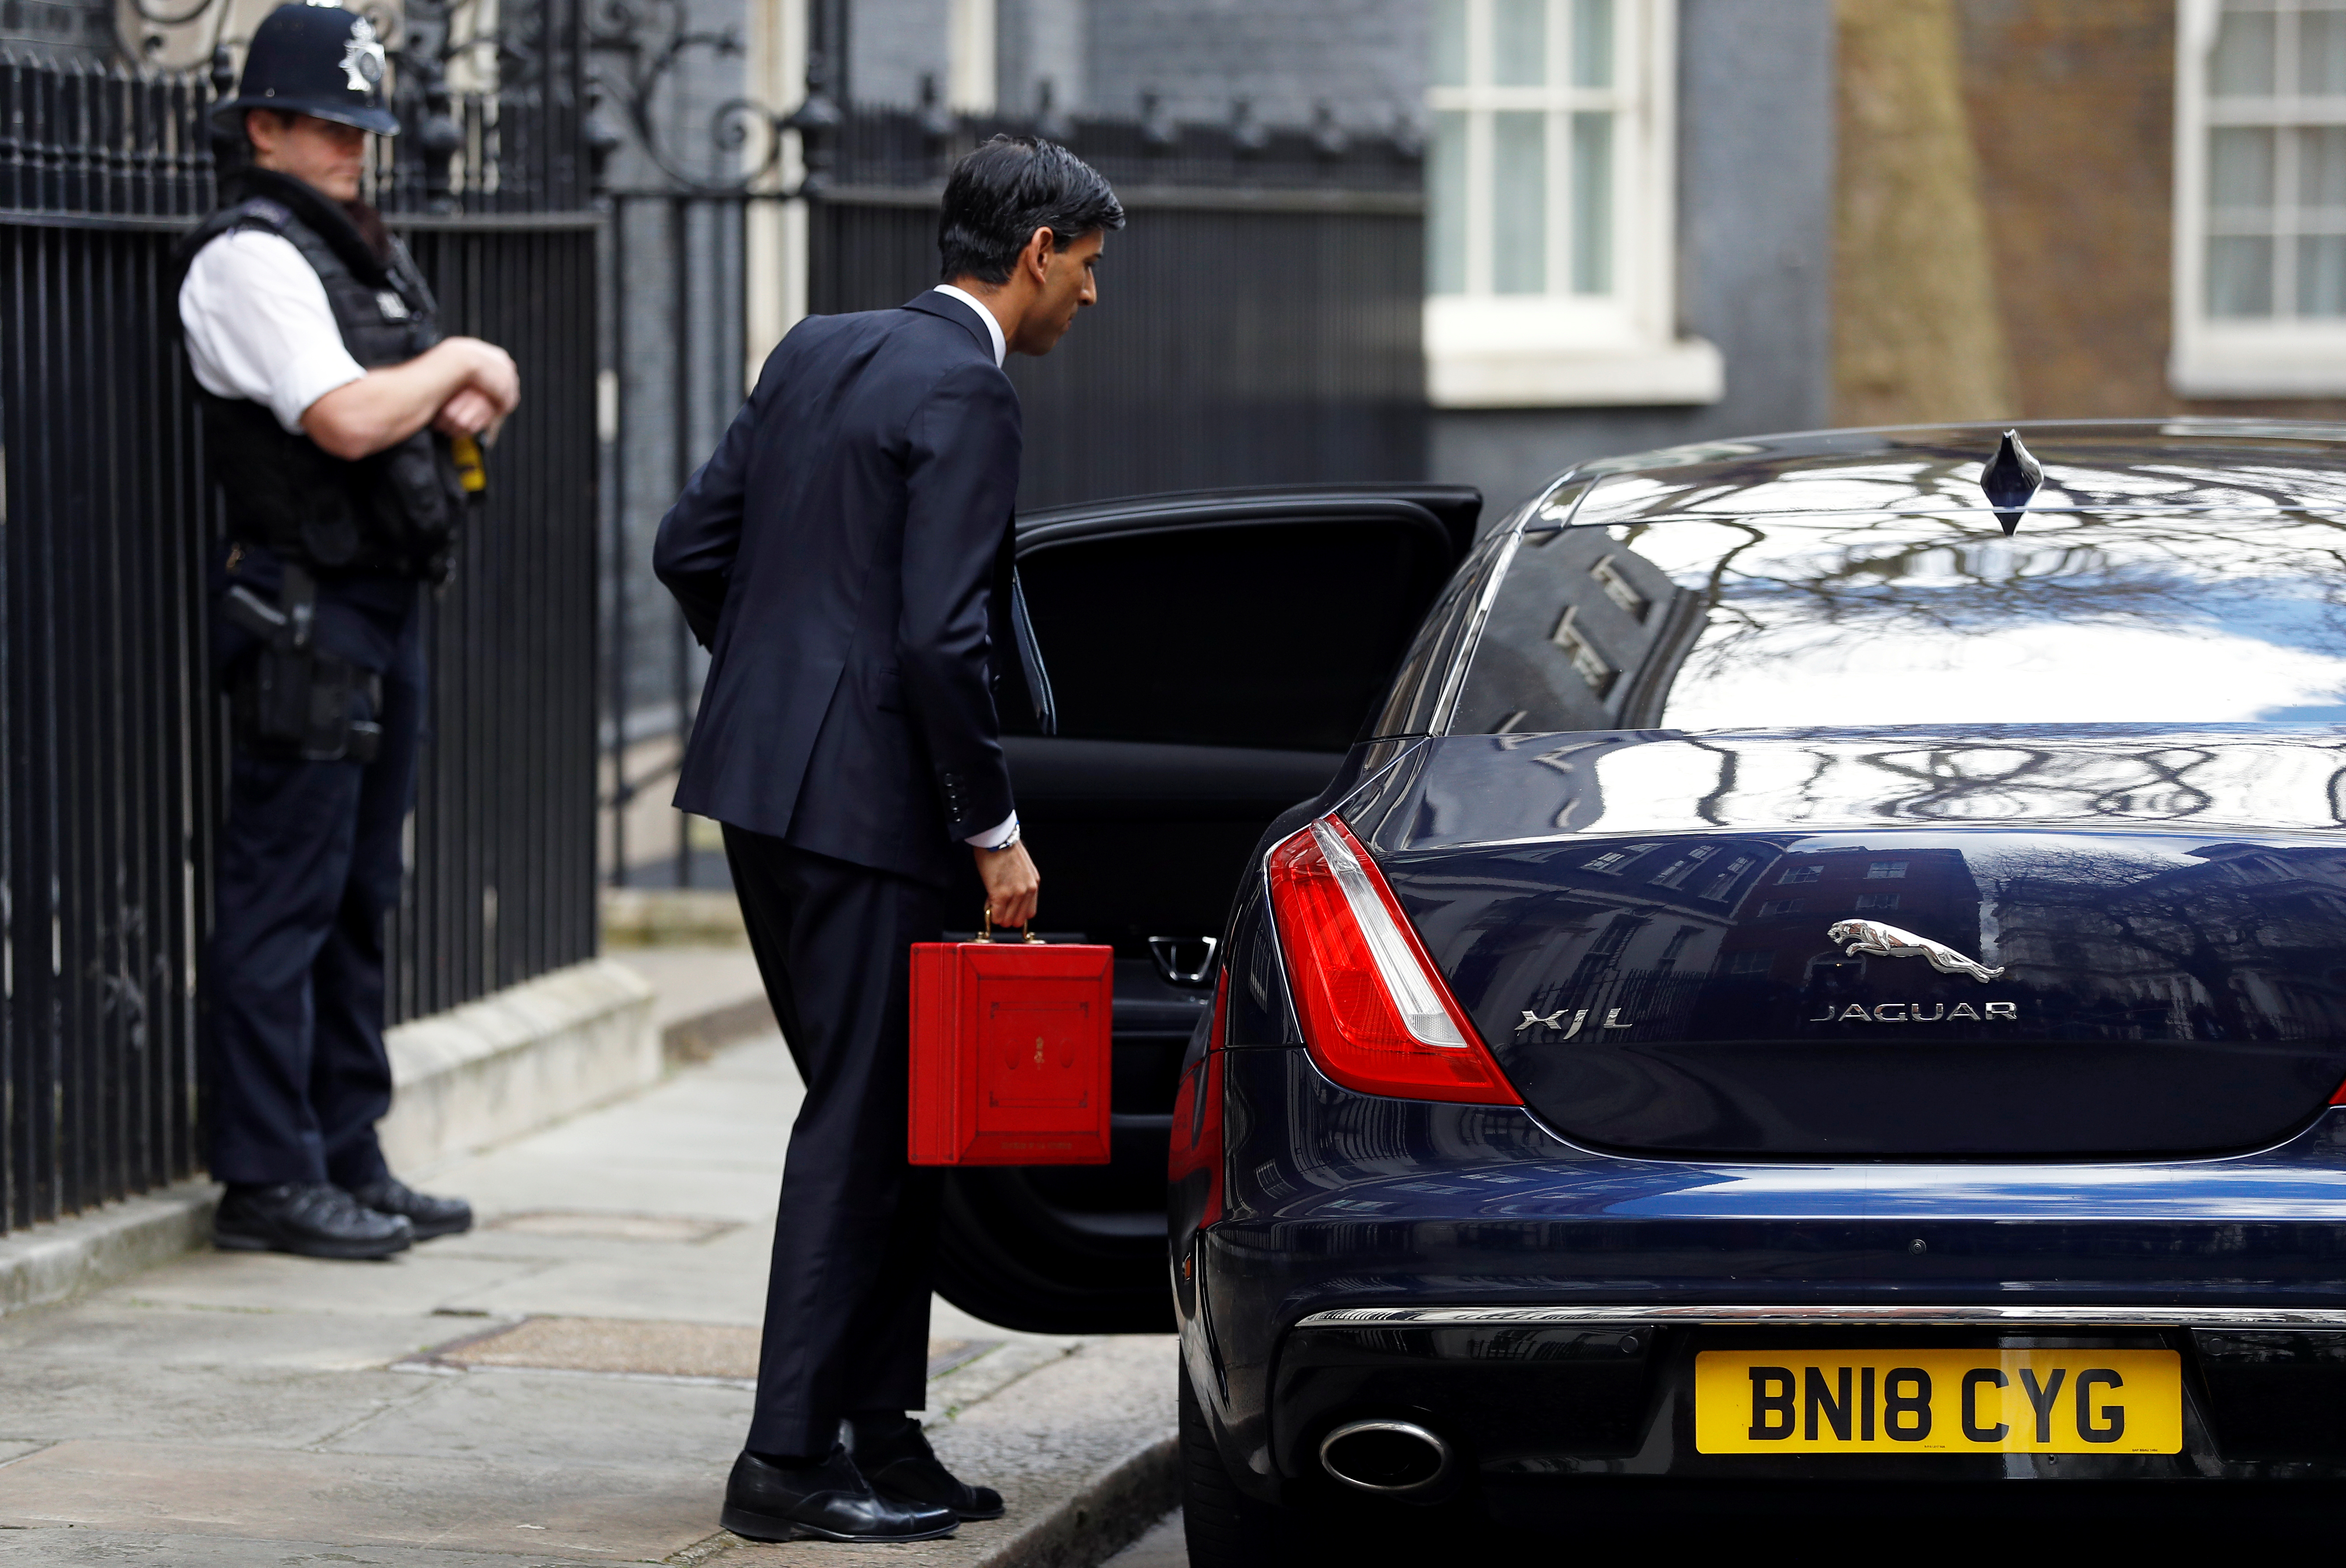 File photo of the current Prime Minister of the United Kingdom, Rishi Sunak, entering a government car on Downing Street in London (REUTERS / Peter Nicholls)